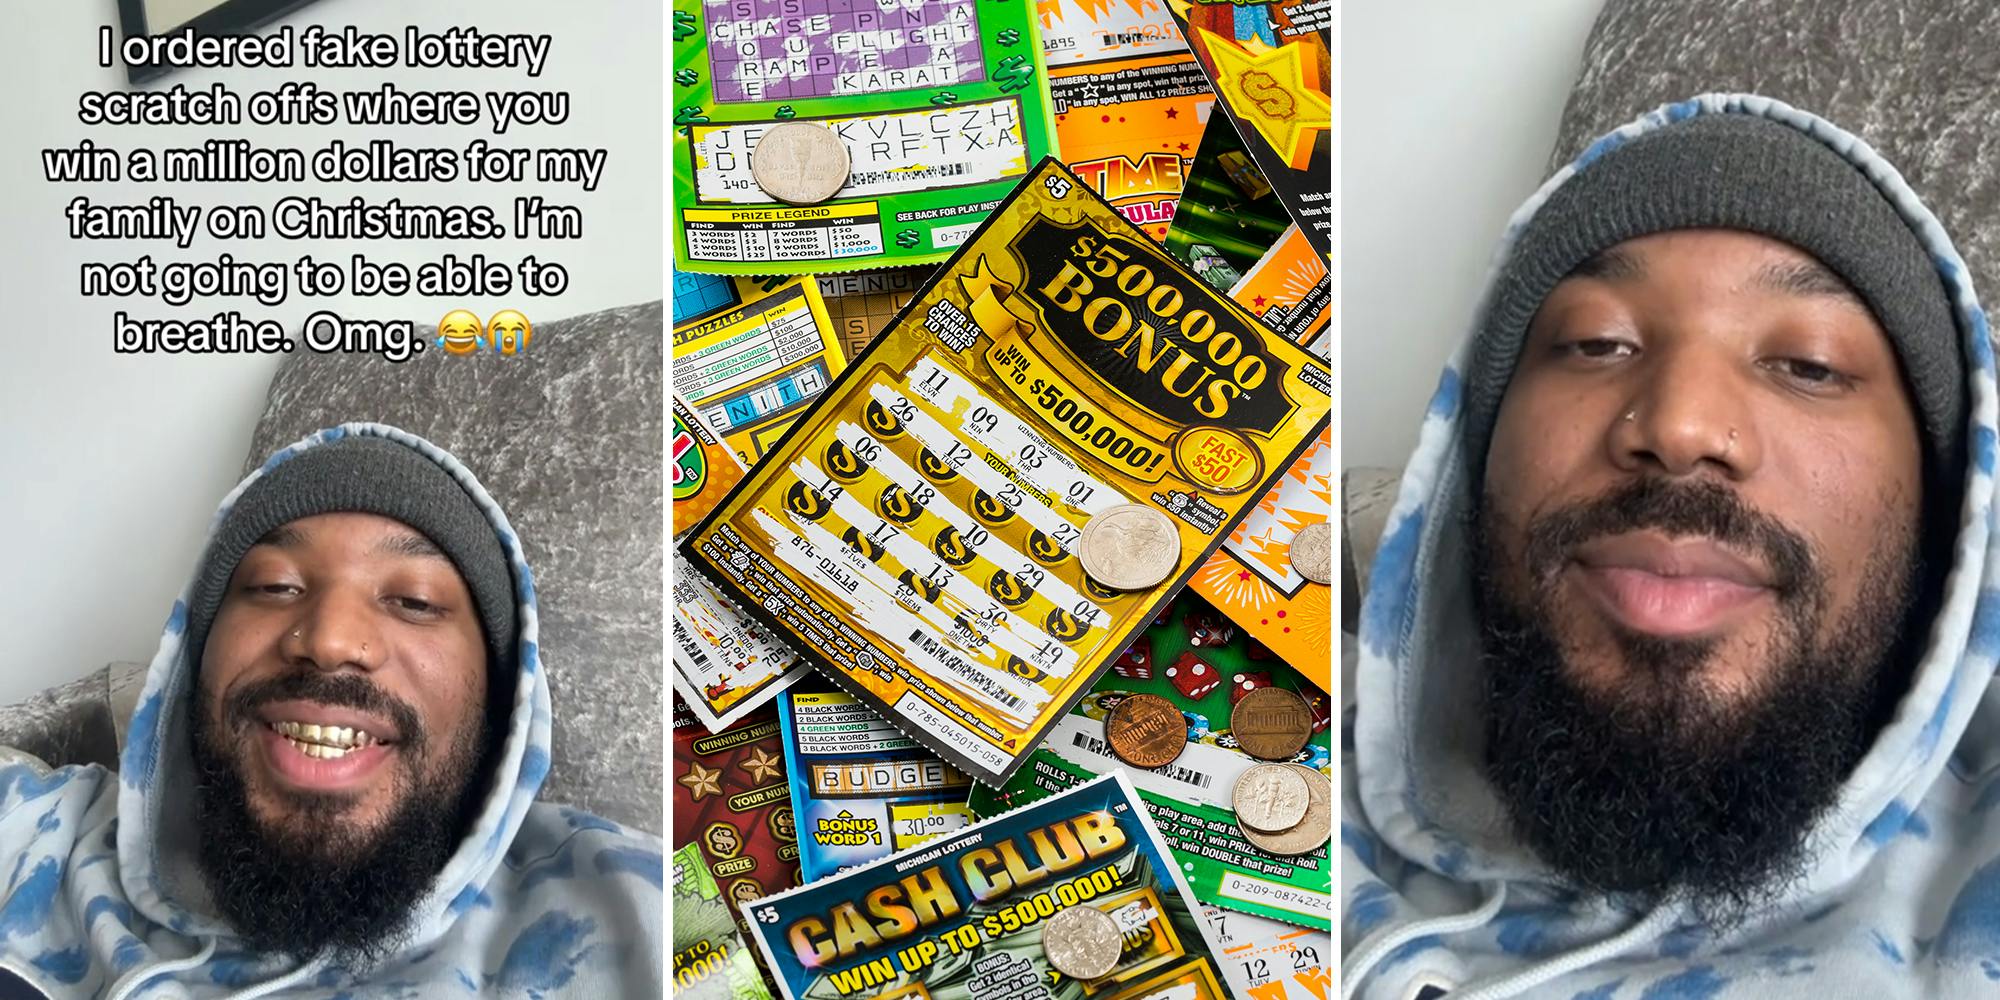 Man orders fake $1 million-winning lottery tickets for family as Christmas gifts